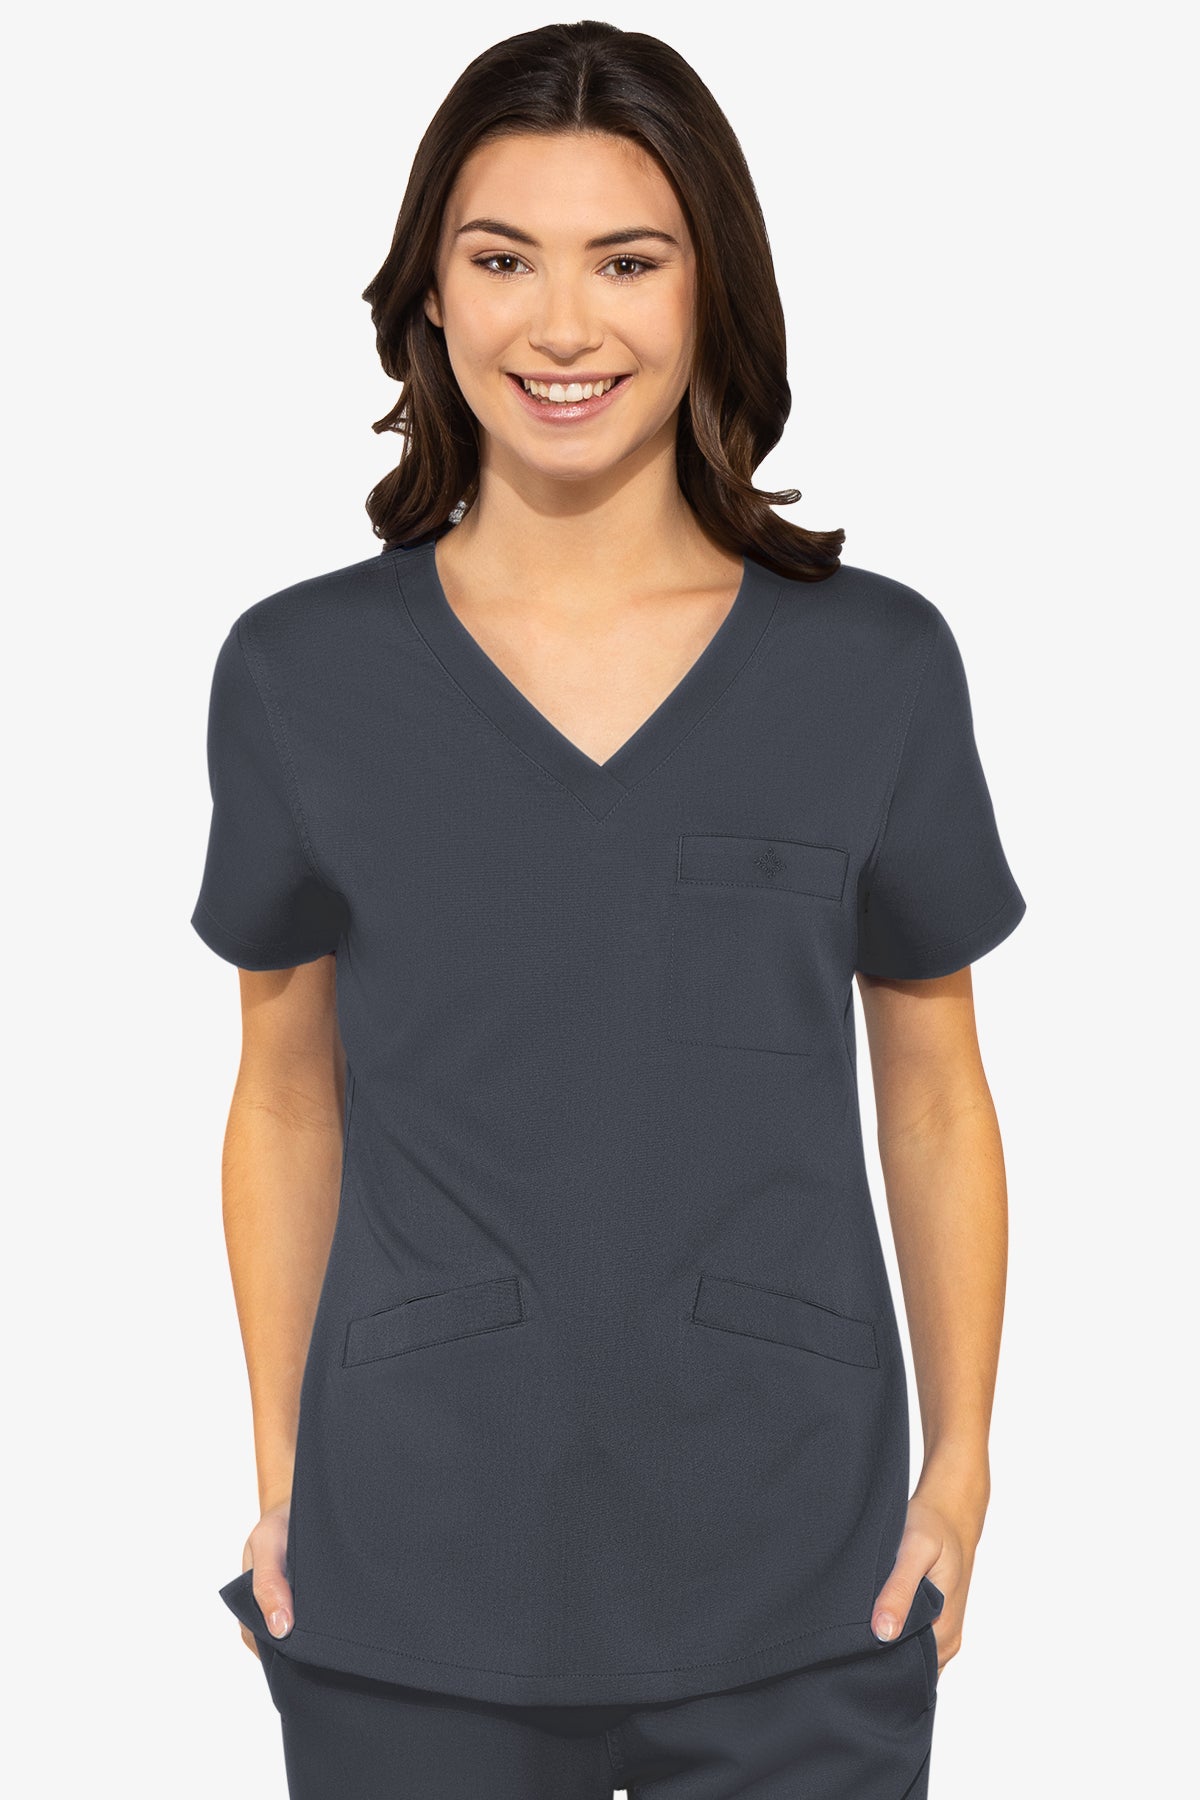 Med Couture Scrub Top Touch Classic V-Neck in Pewter at Parker's Clothing and Shoes.